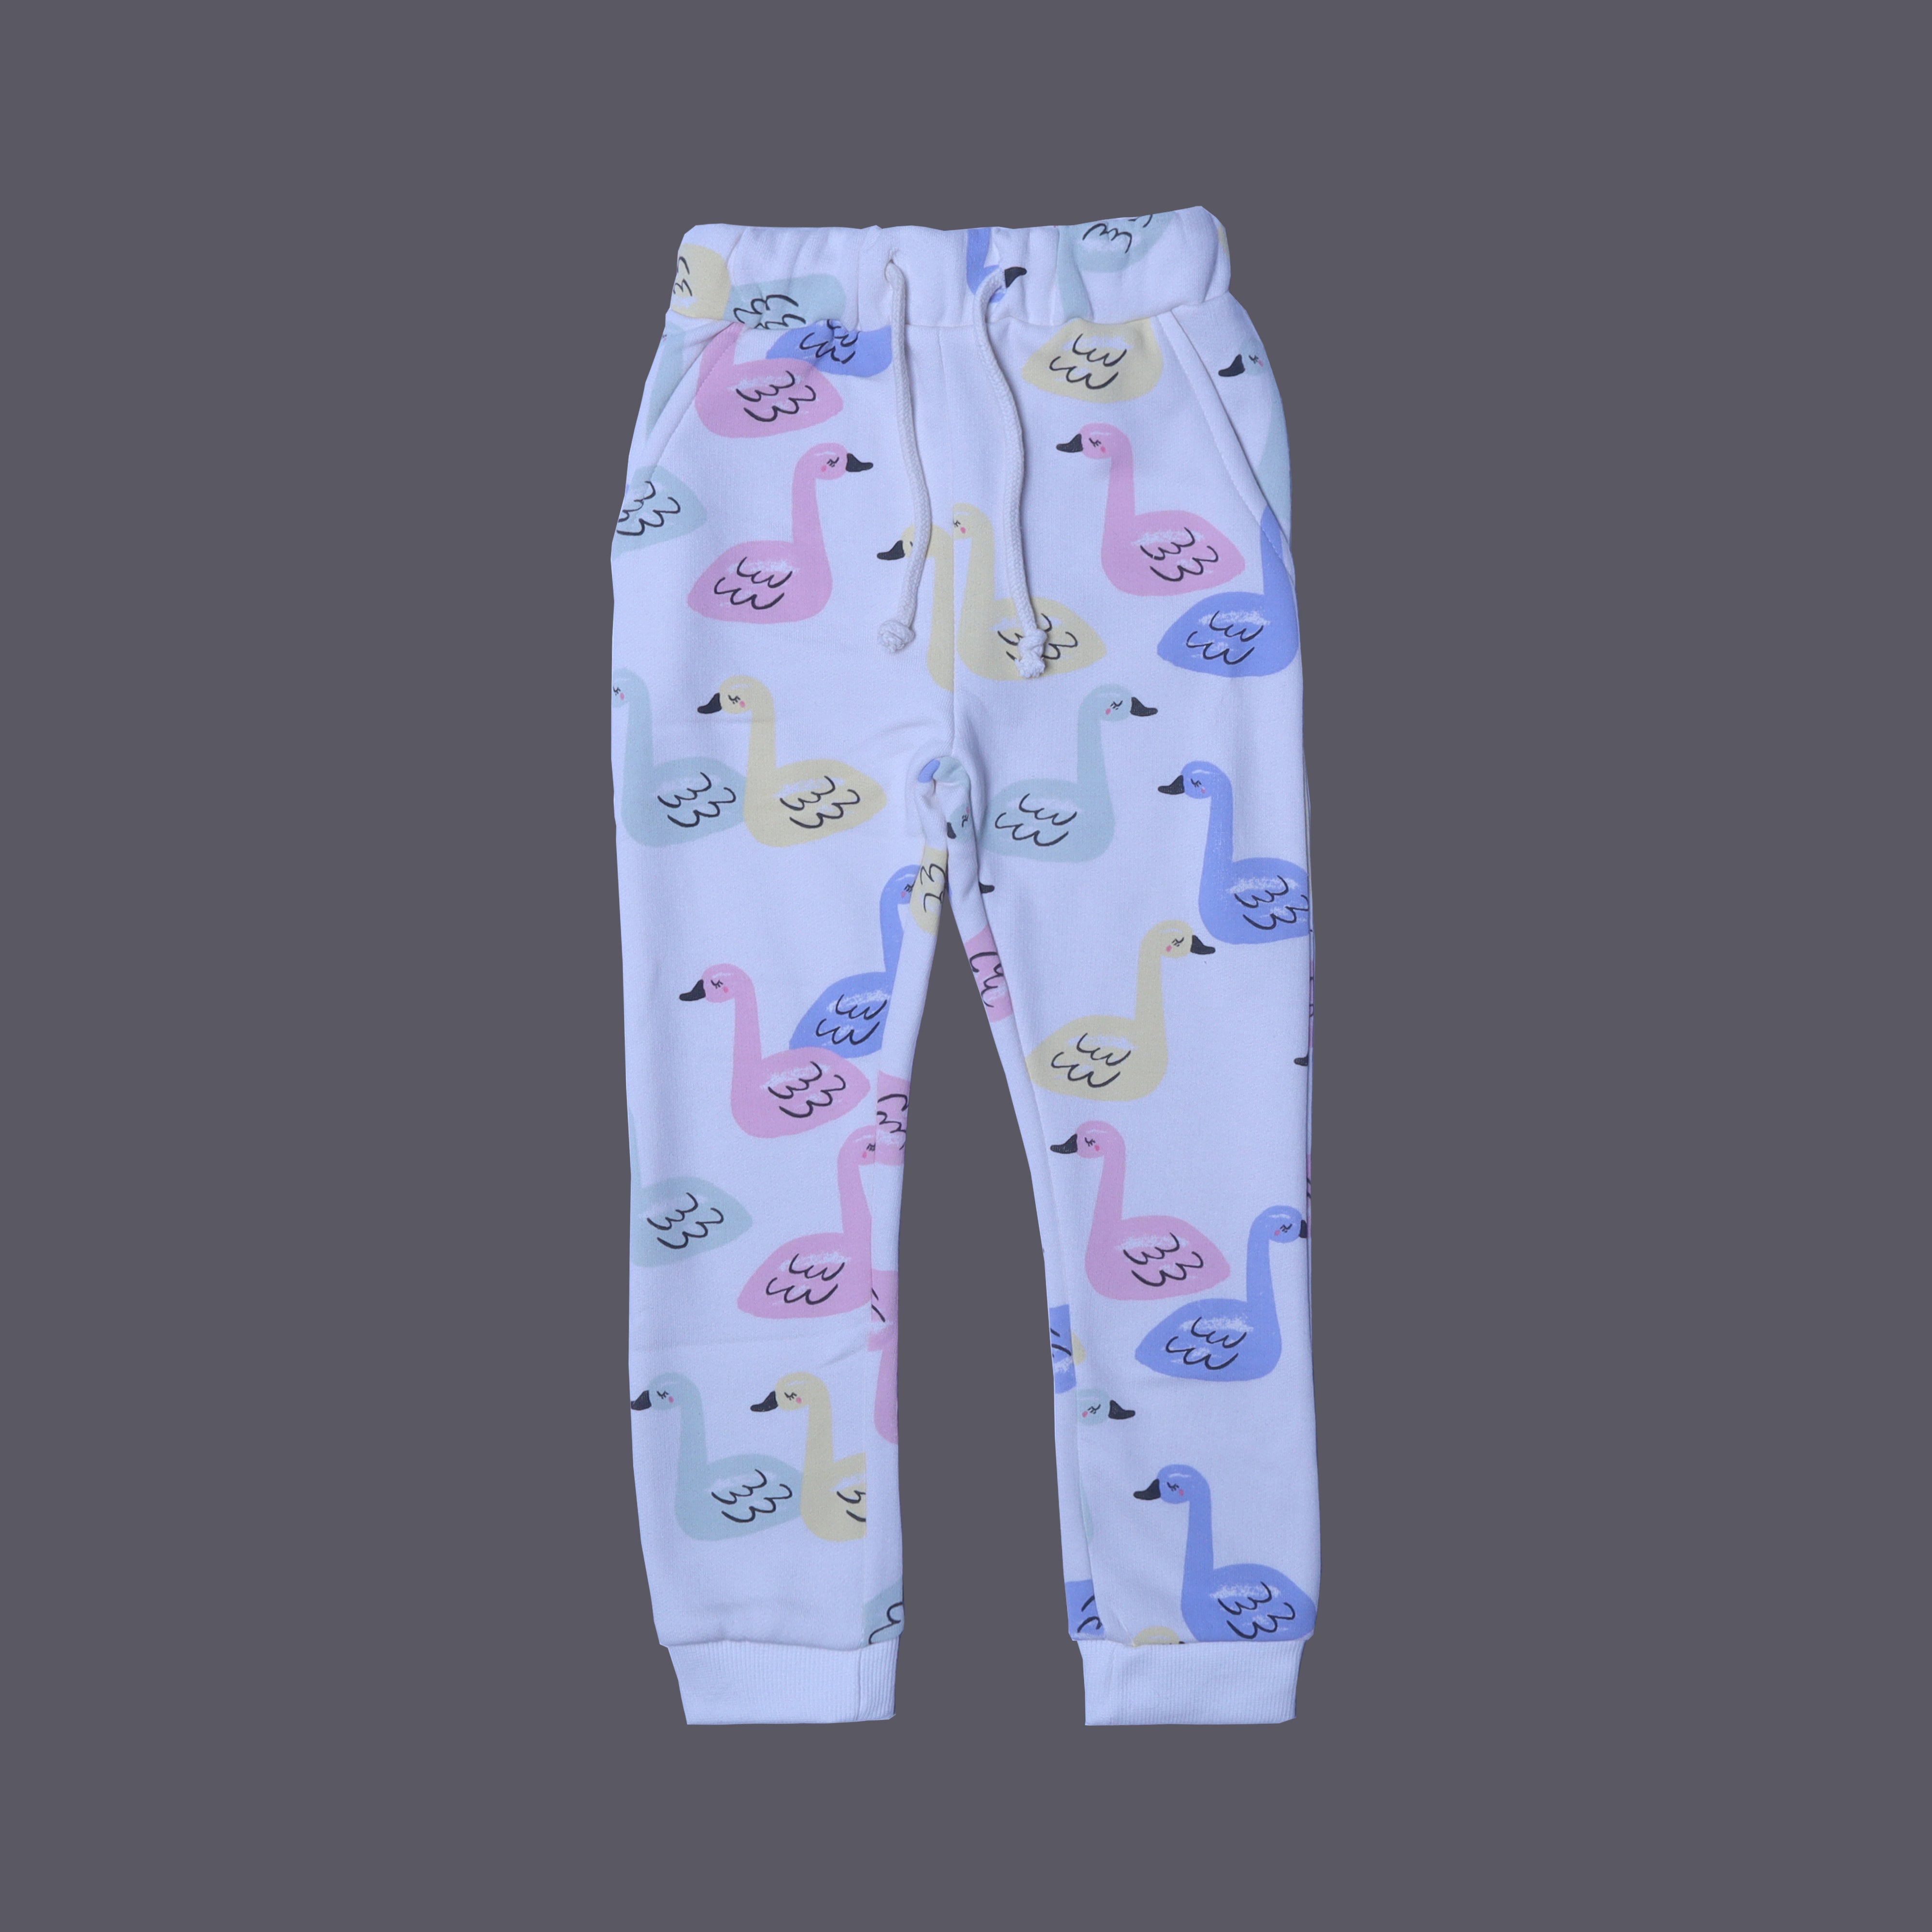 PACK OF 2 PINK FLOWERS & DUCKS PRINTED DOUBLE POCKET JOGGER PANTS TROUSER